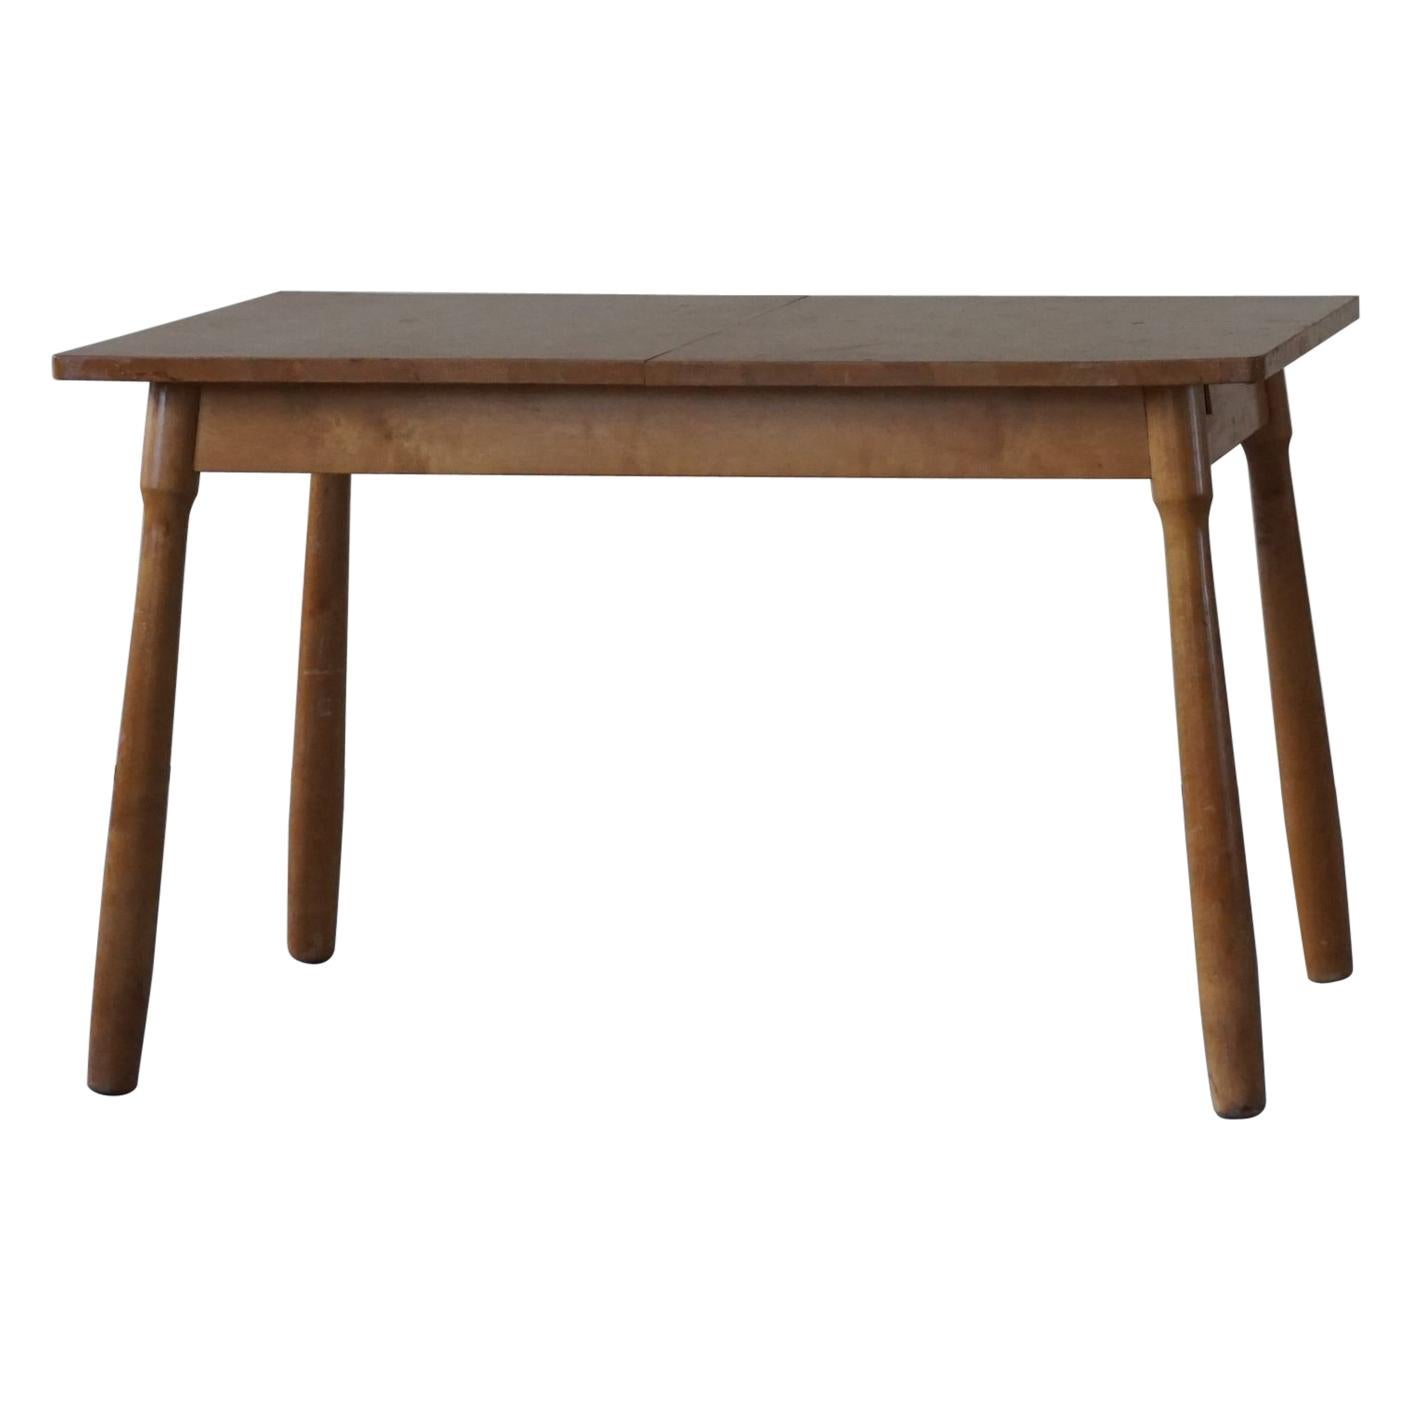 Danish Modern Desk / Dining Table in Birch Attributed to Philip Arctander, 1940s